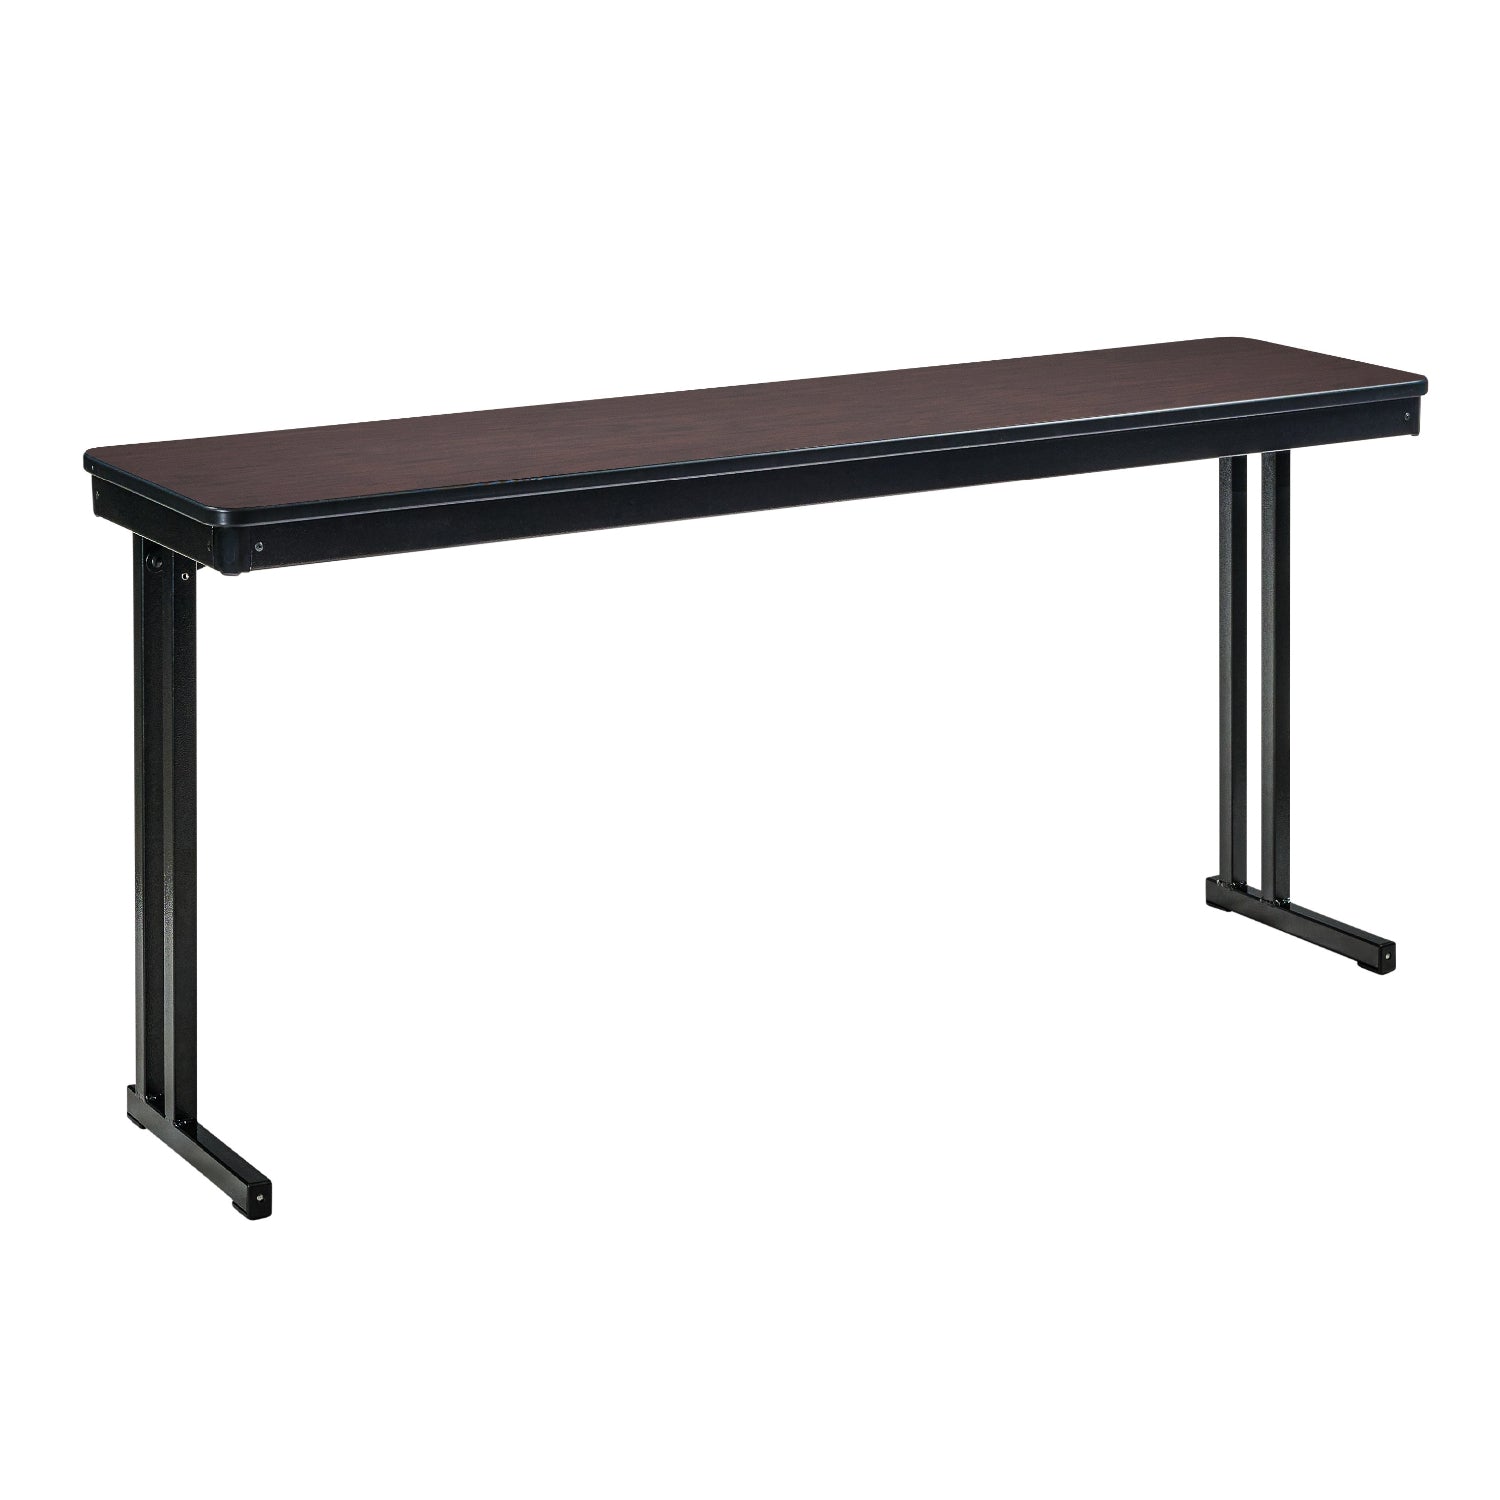 Max Seating Folding Training and Seminar Table with Cantilever Legs, 24" x 60", High Pressure Laminate Top with Particleboard Core/PVC Edge Banding